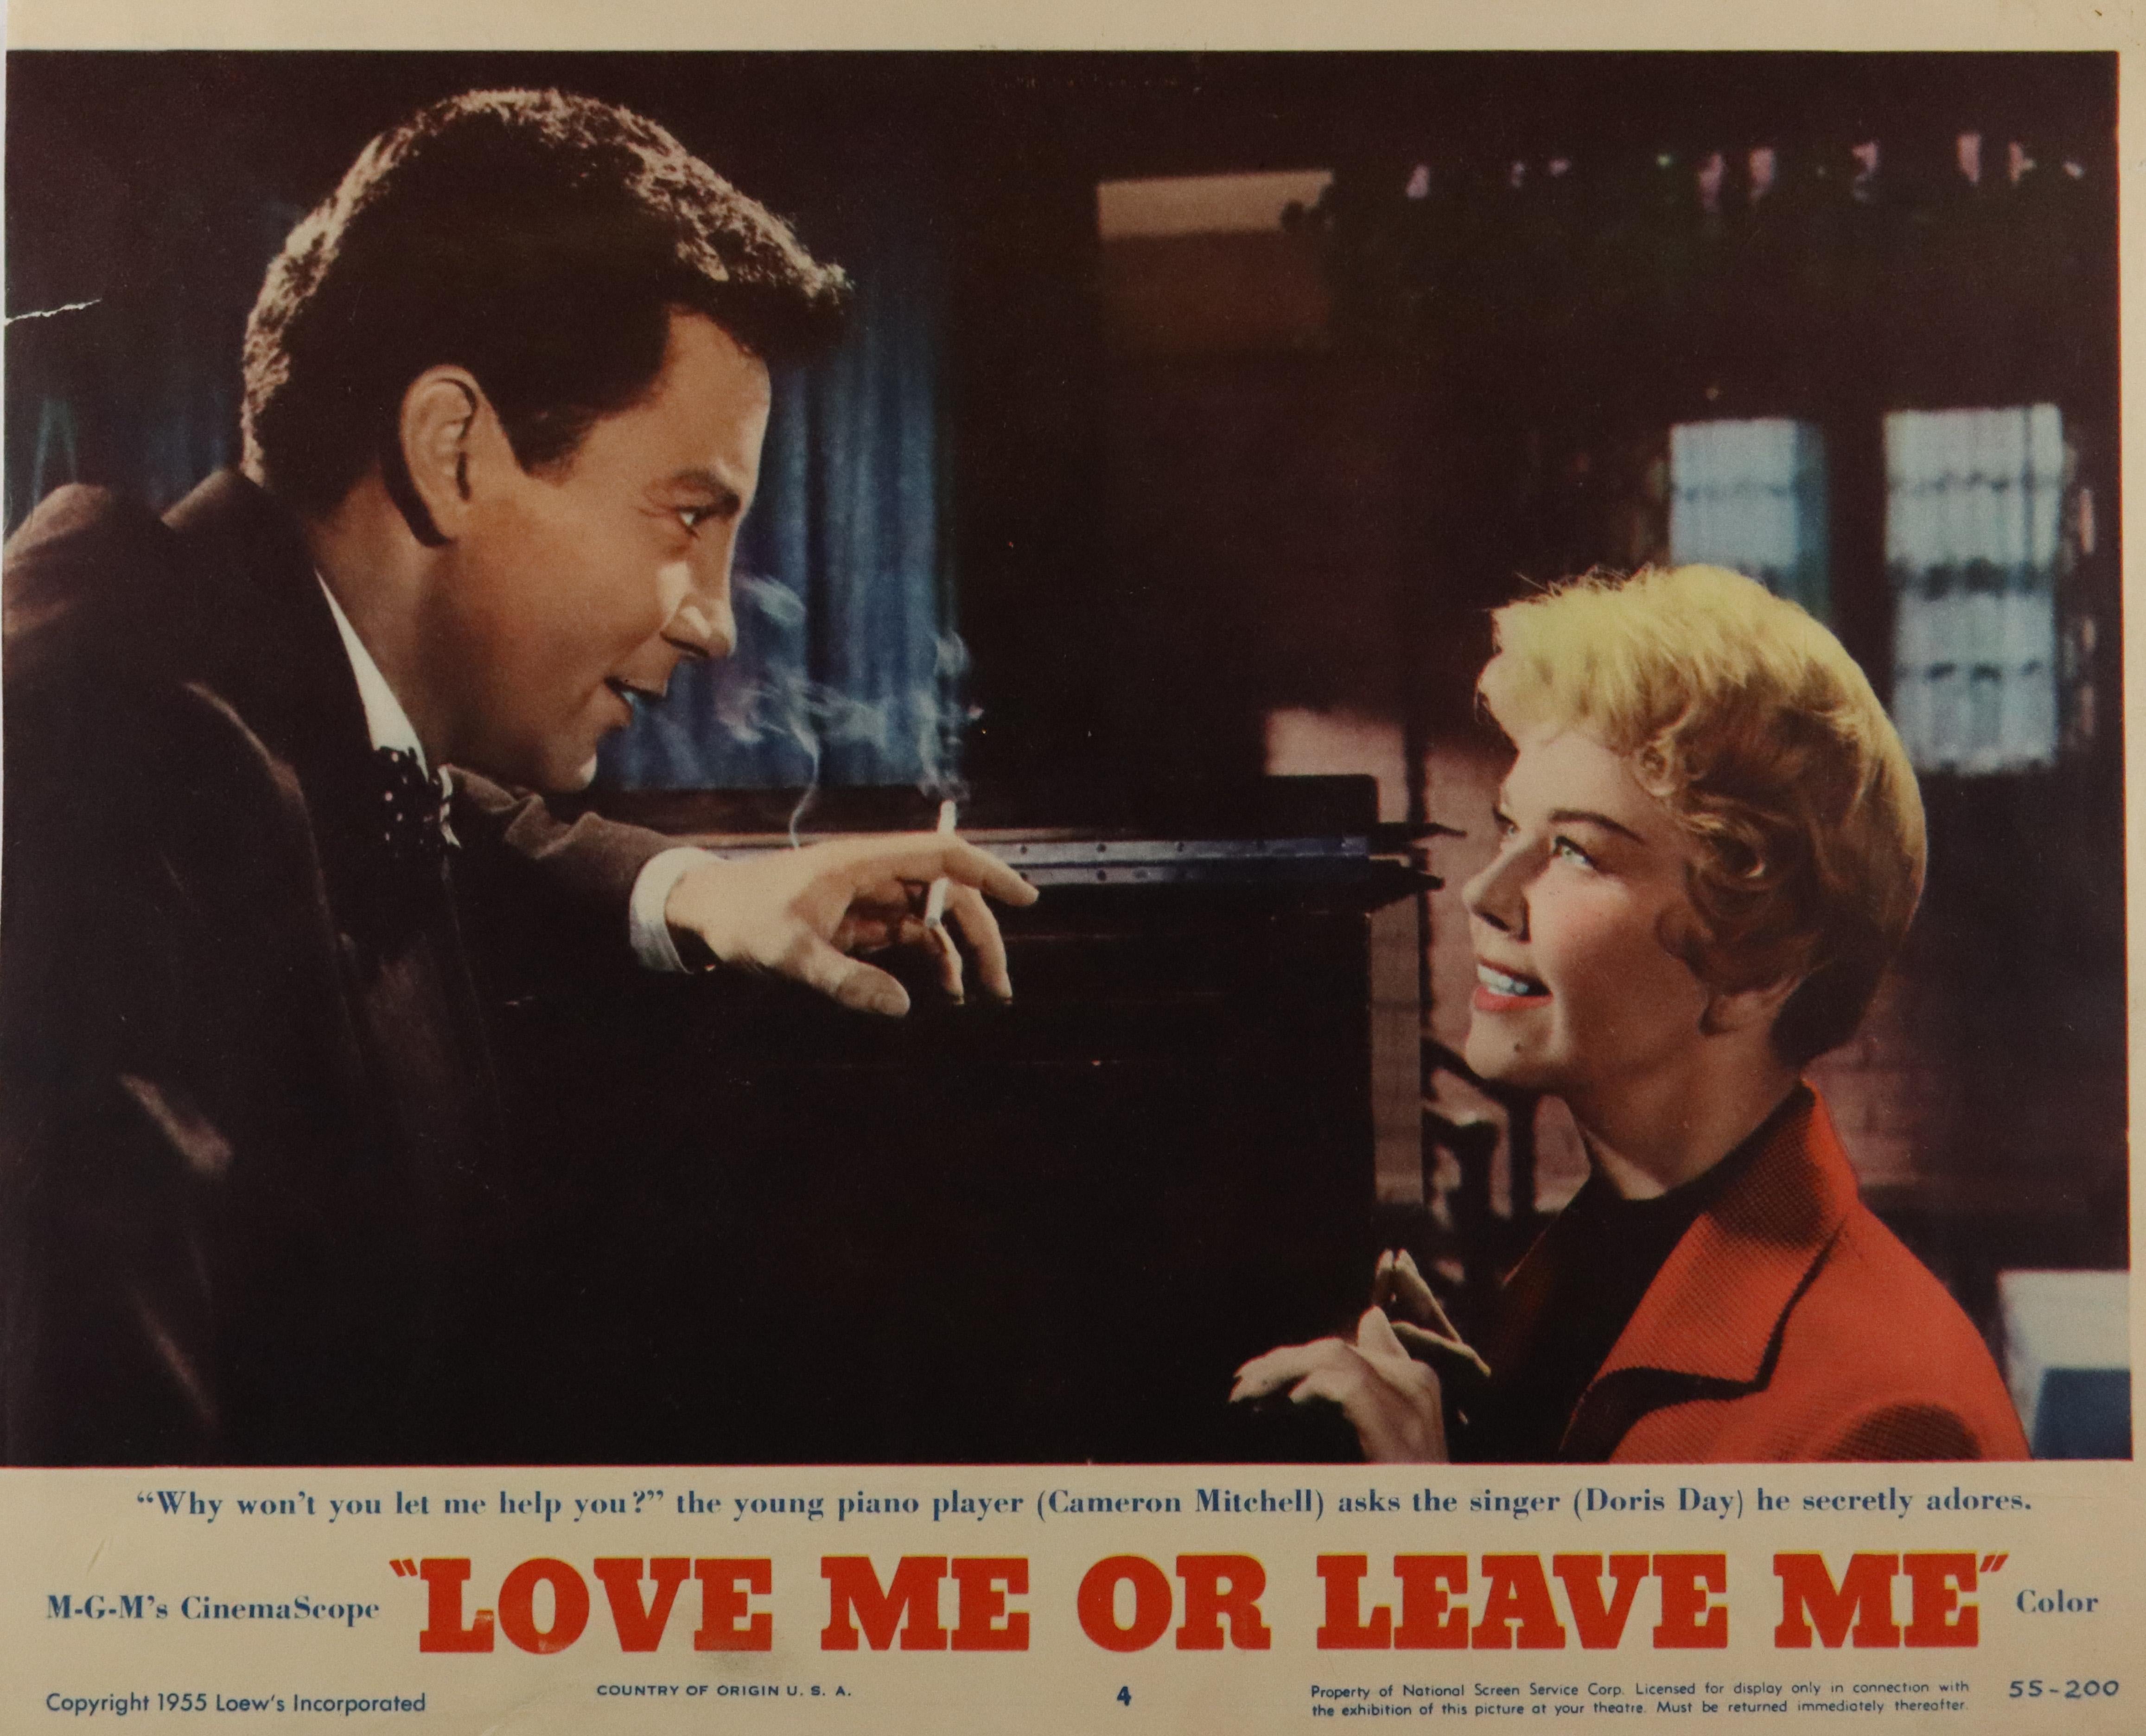 Unknown Abstract Photograph - "Love Me or Leave Me", Lobby Card, USA 1955